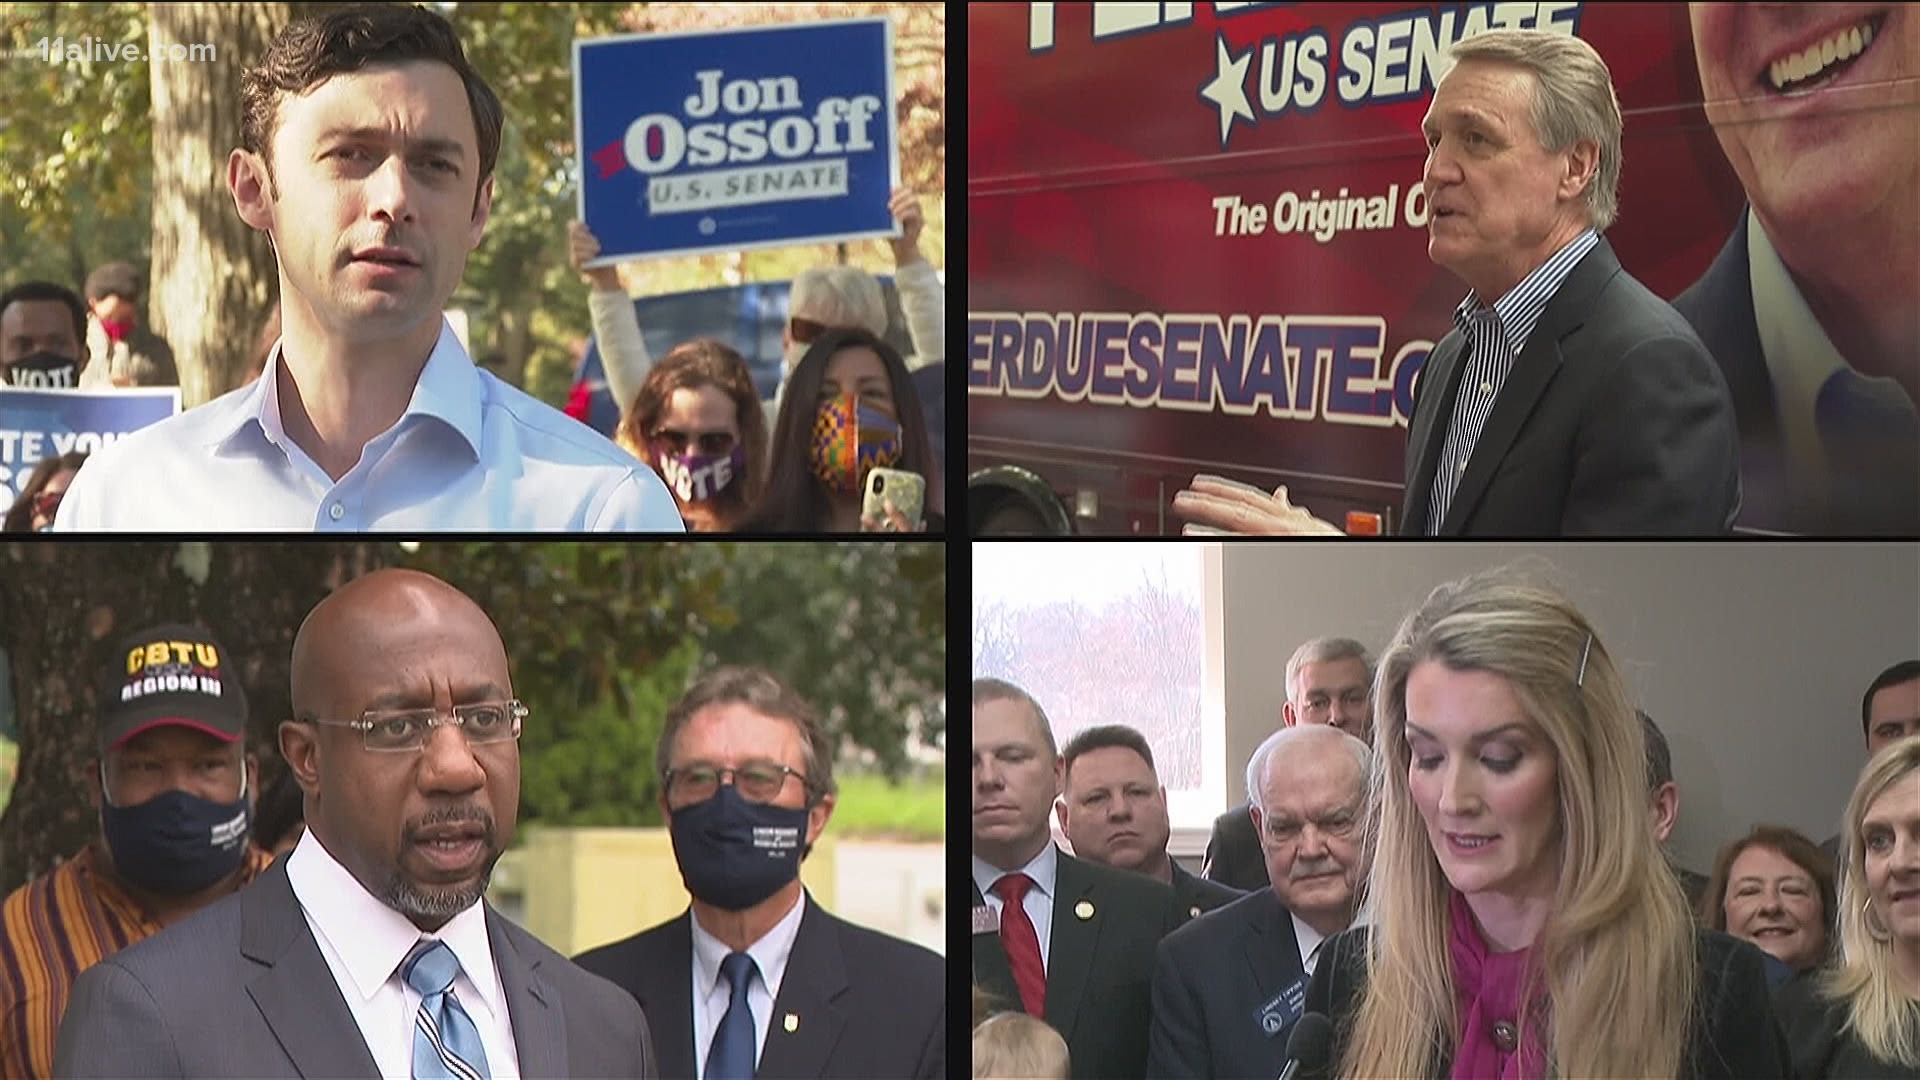 Senators David Perdue and Kelly Loeffler are making the rounds as are their competitors, Jon Ossoff and the Rev. Raphael Warnock.